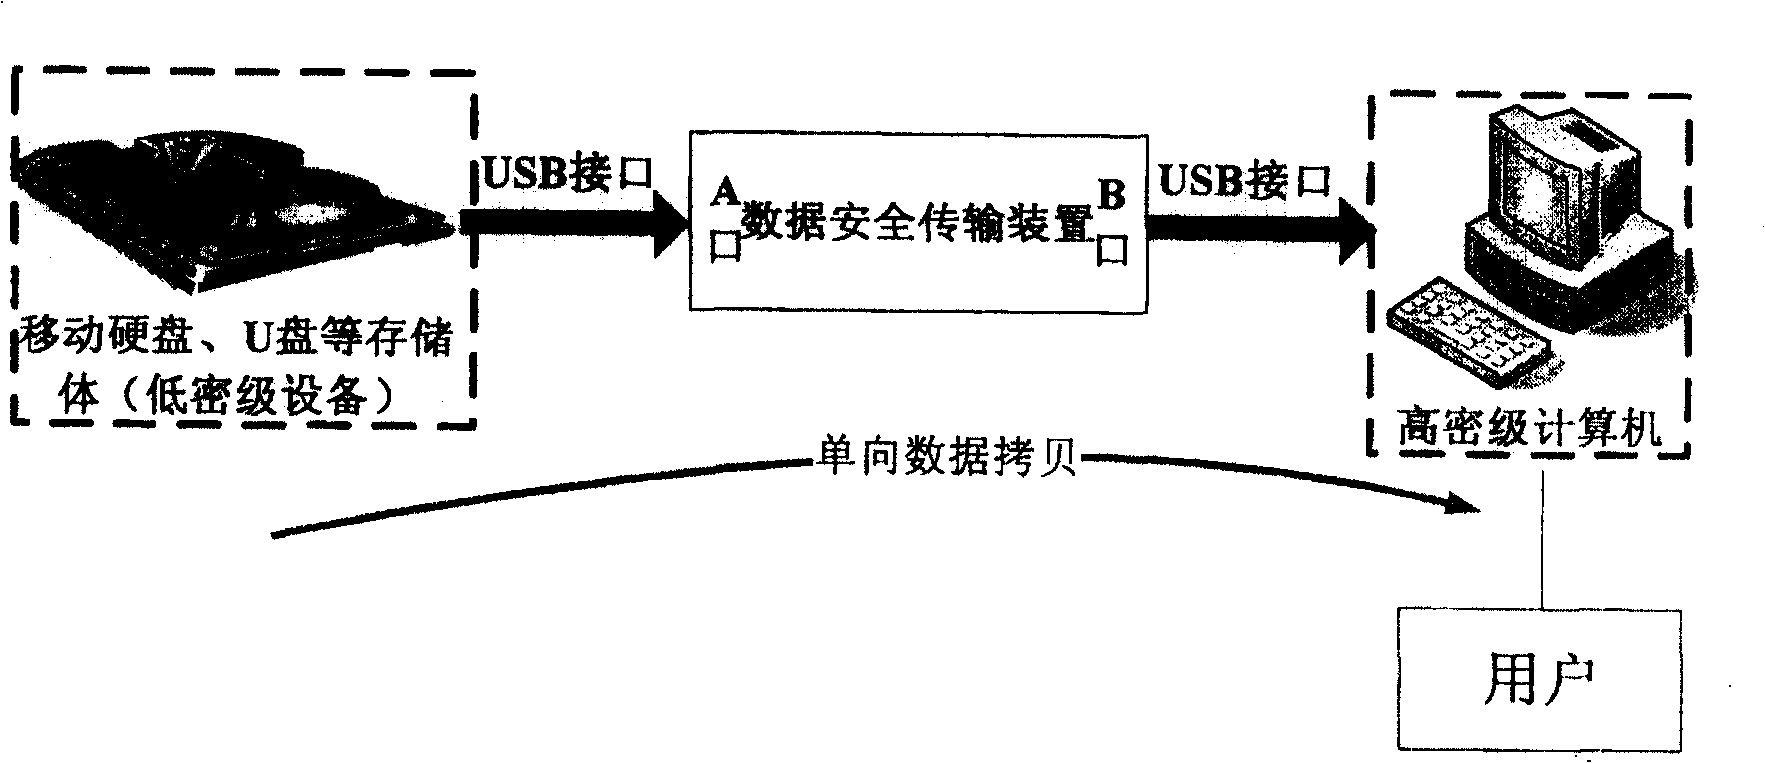 Protection system for data security transmission between computer and disc